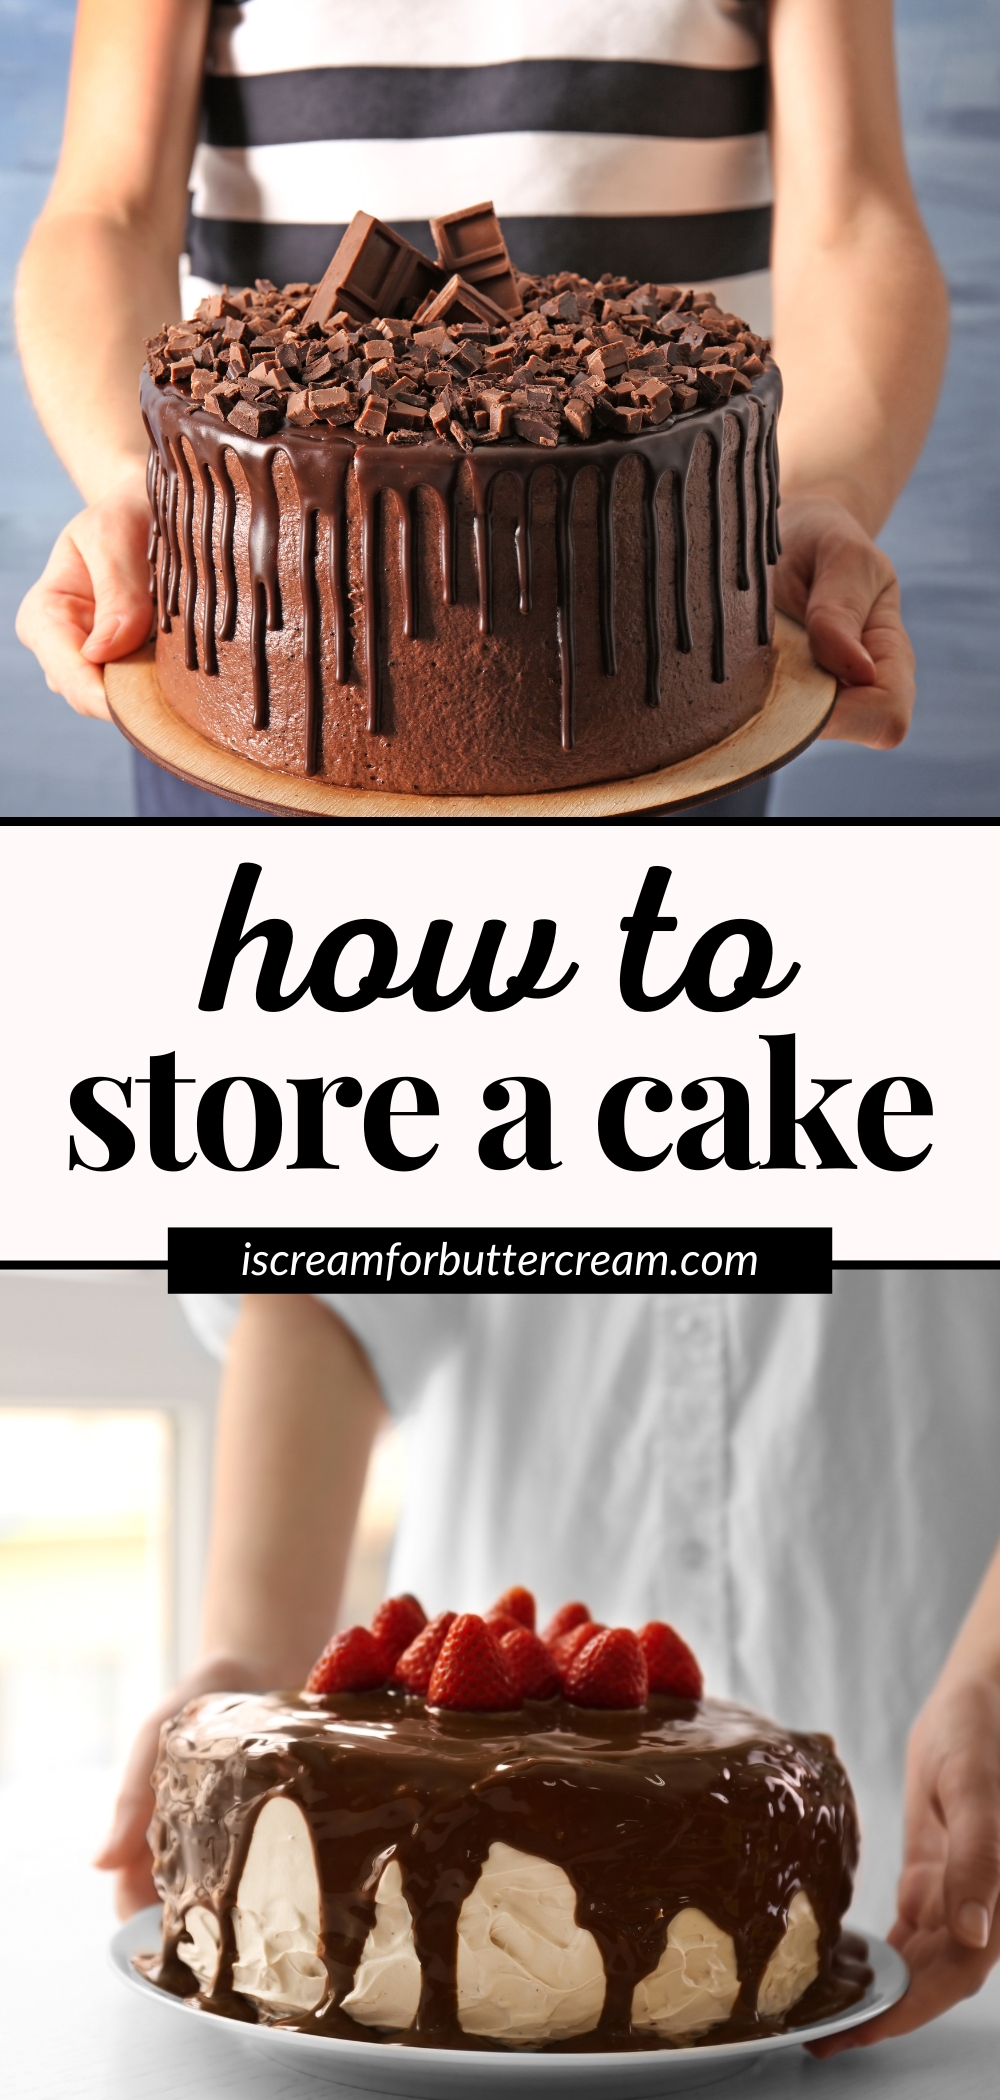 Two people holding cakes with text overlay that says how to store a cake.